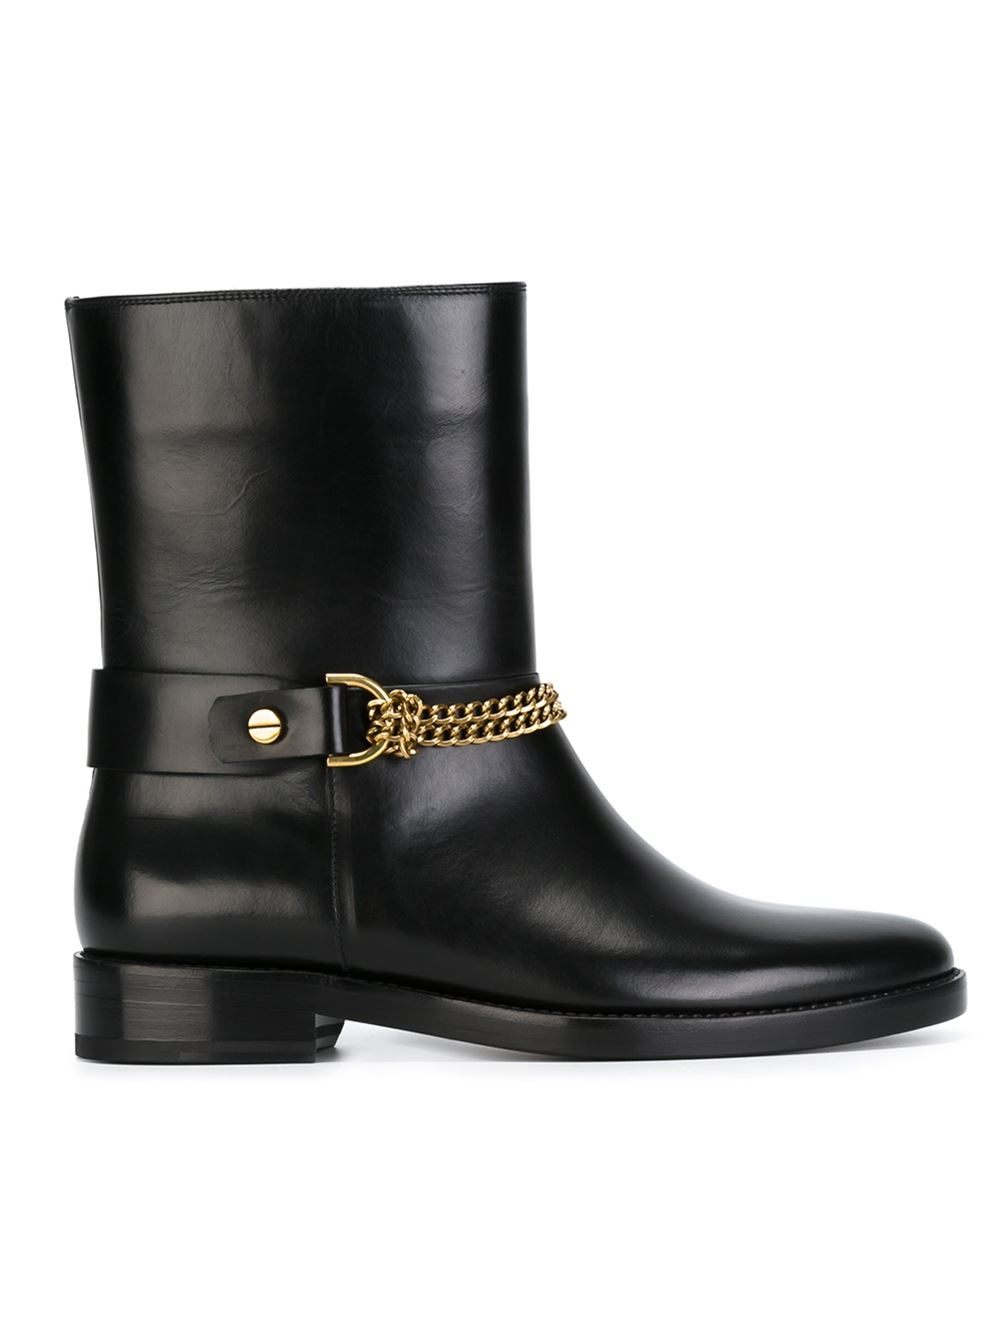 Lanvin Chain-Detail Leather Combat Boots in Black - Lyst